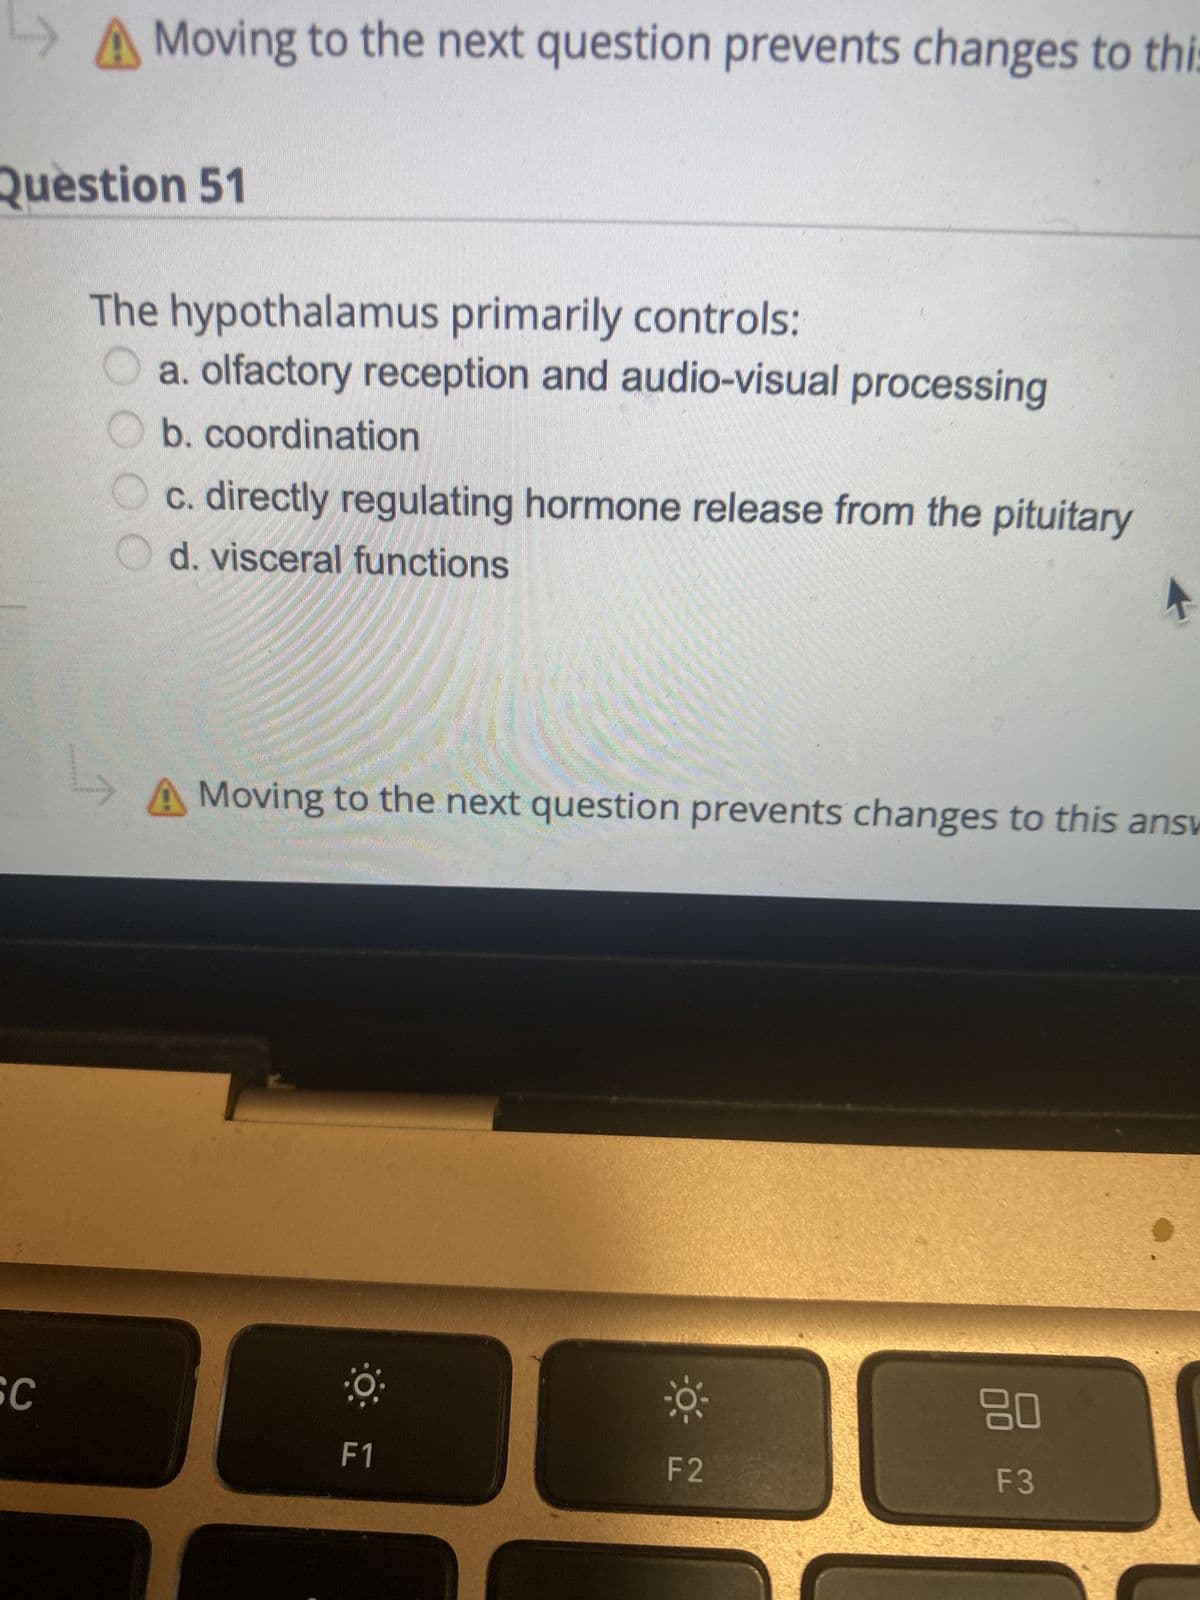 Question 51
SC
Moving to the next question prevents changes to this
The hypothalamus primarily controls:
a. olfactory reception and audio-visual processing
b. coordination
00
L
c. directly regulating hormone release from the pituitary
d. visceral functions
Moving to the next question prevents changes to this answ
0
F1
0³-
F2
80
F3